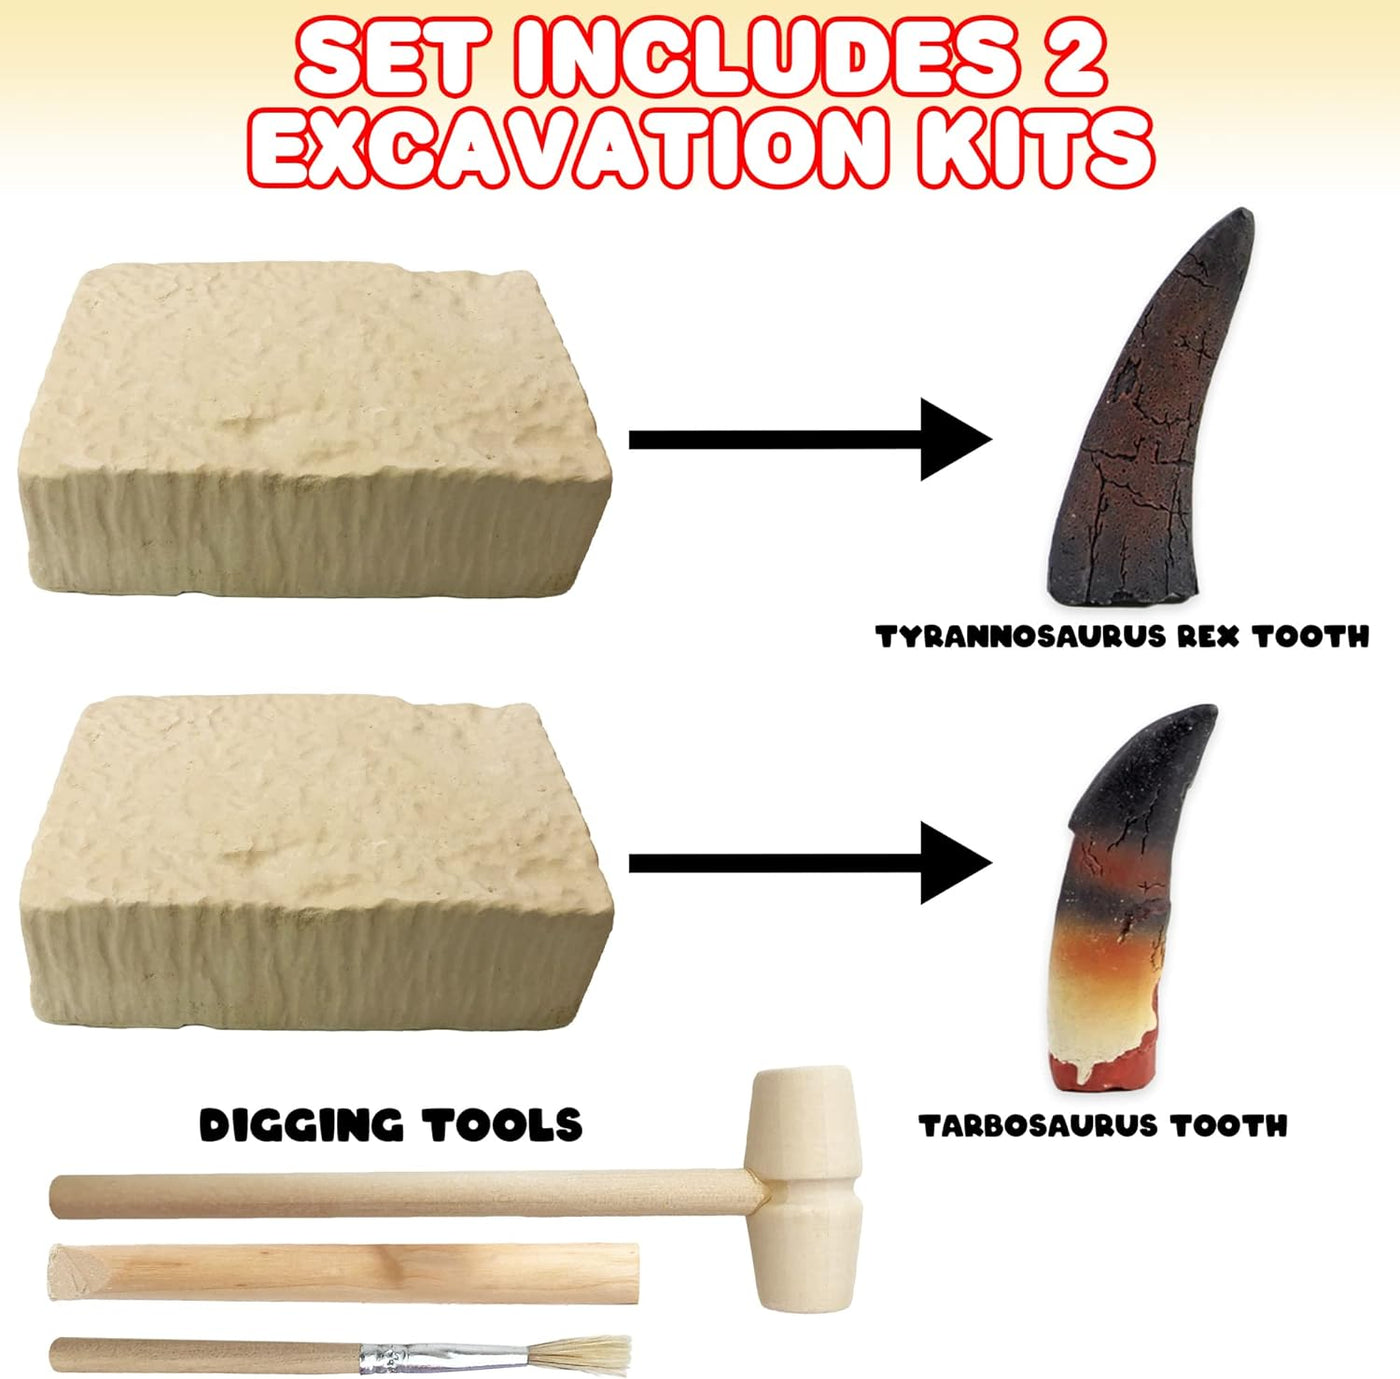 Dino Teeth Dig and Discover Excavation Kit for Kids, Includes T-rex and Tarbosaurus Toy Fossil Teeth with 2 Digging Tools